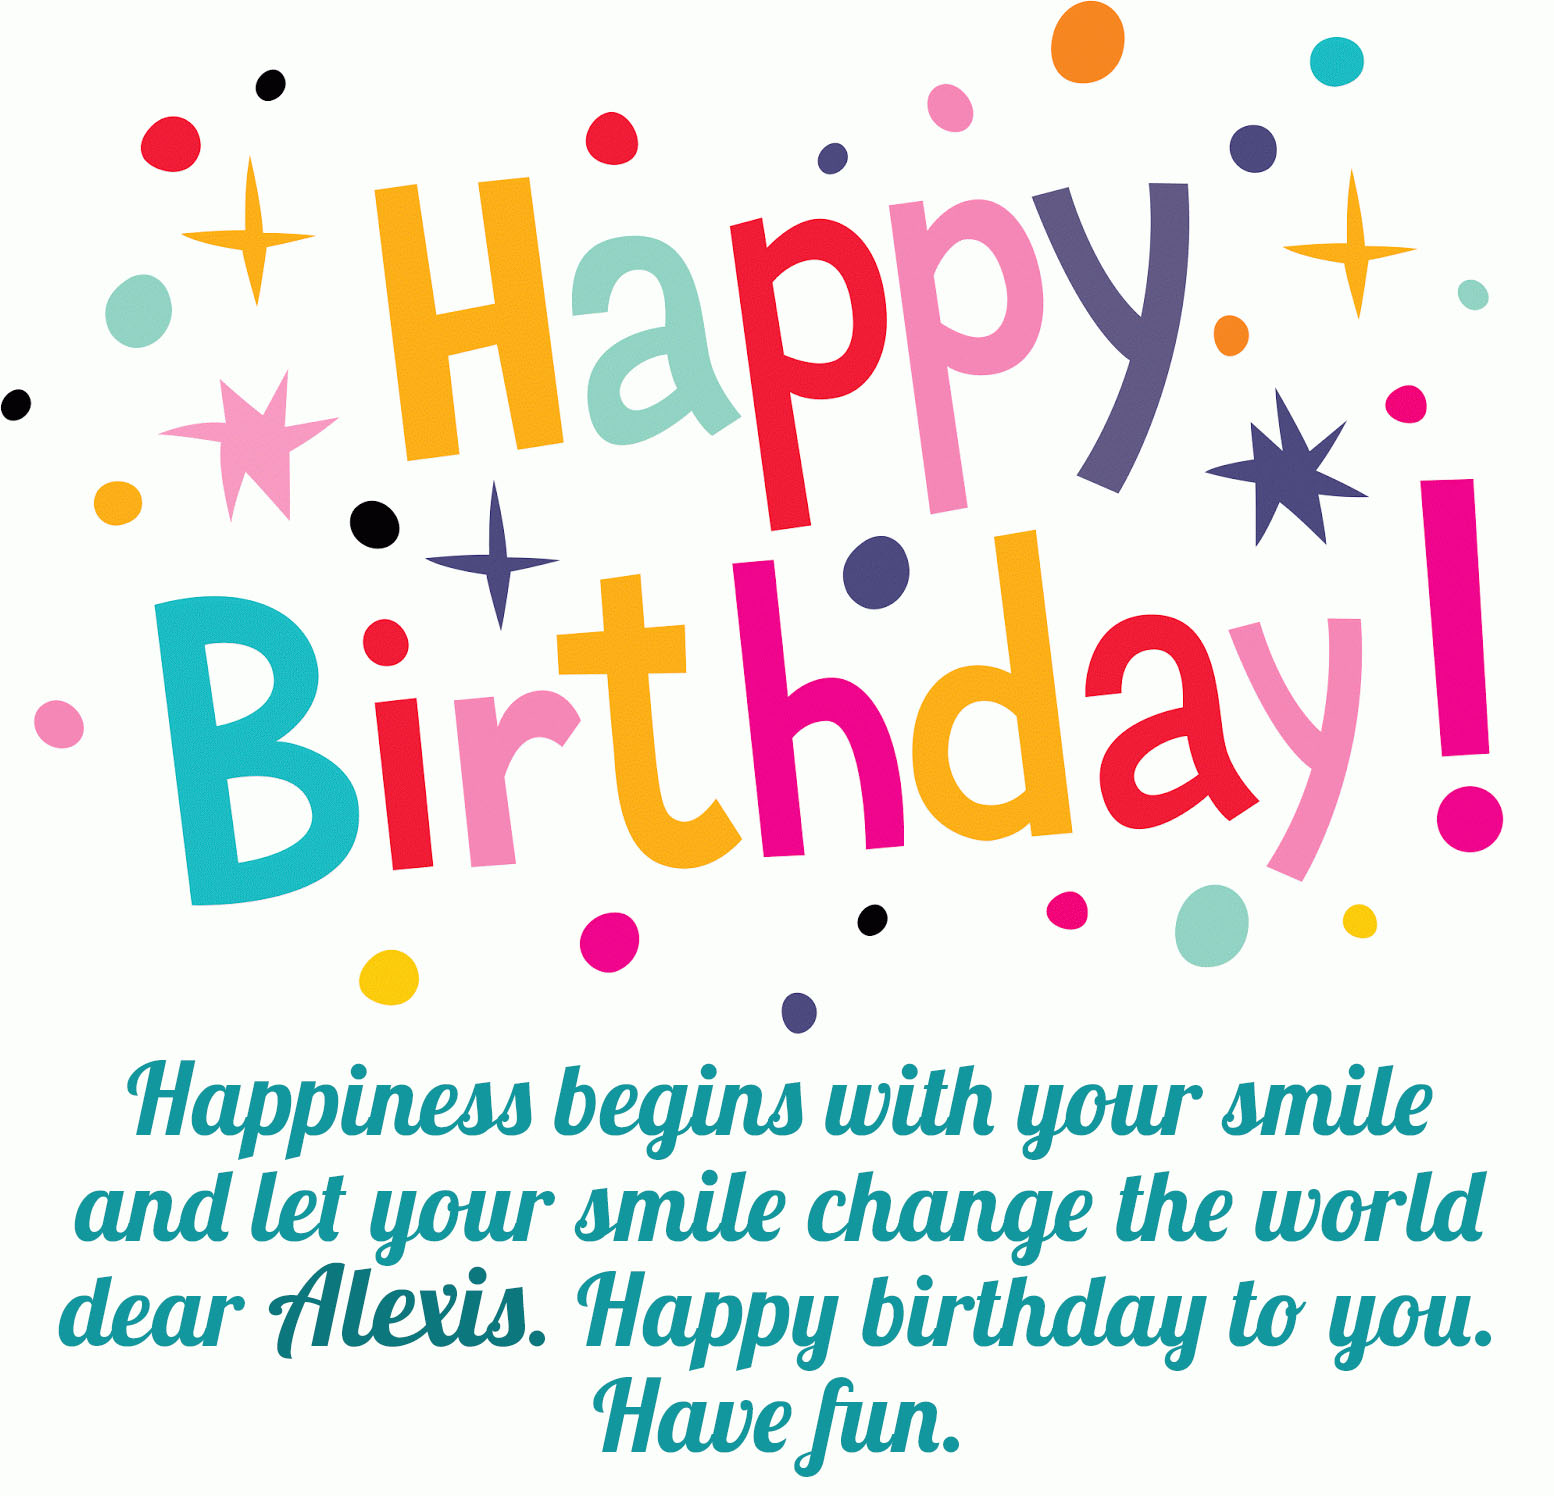 images with names Have fun and Happy Birthday Alexis!